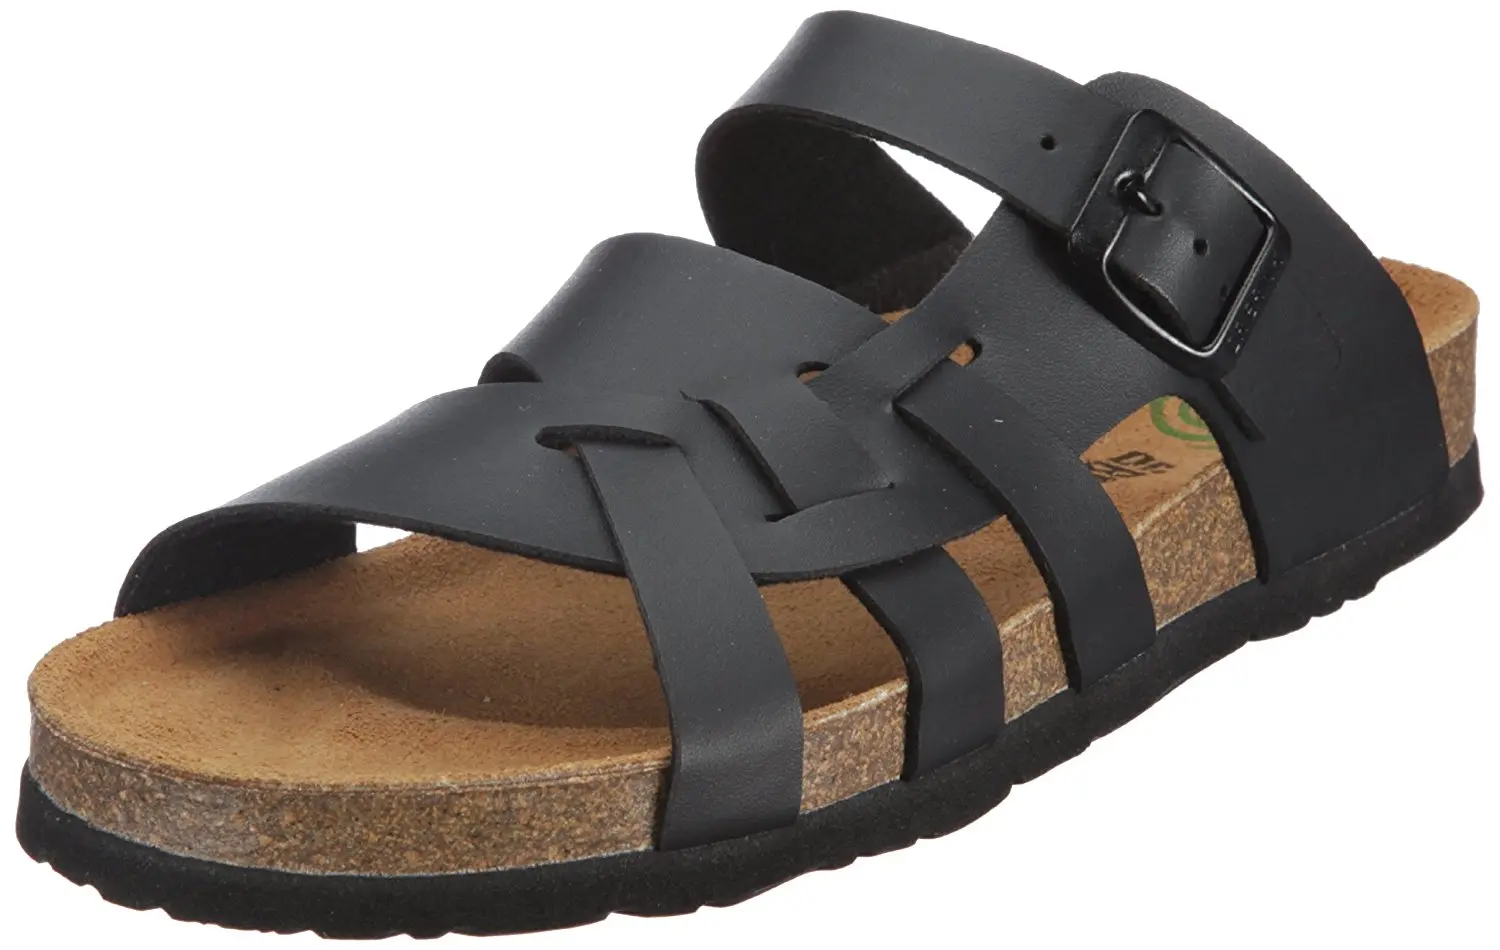 Buy Dr. Brinkmann Womens Footbed Sandal Black in Cheap Price on Alibaba.com